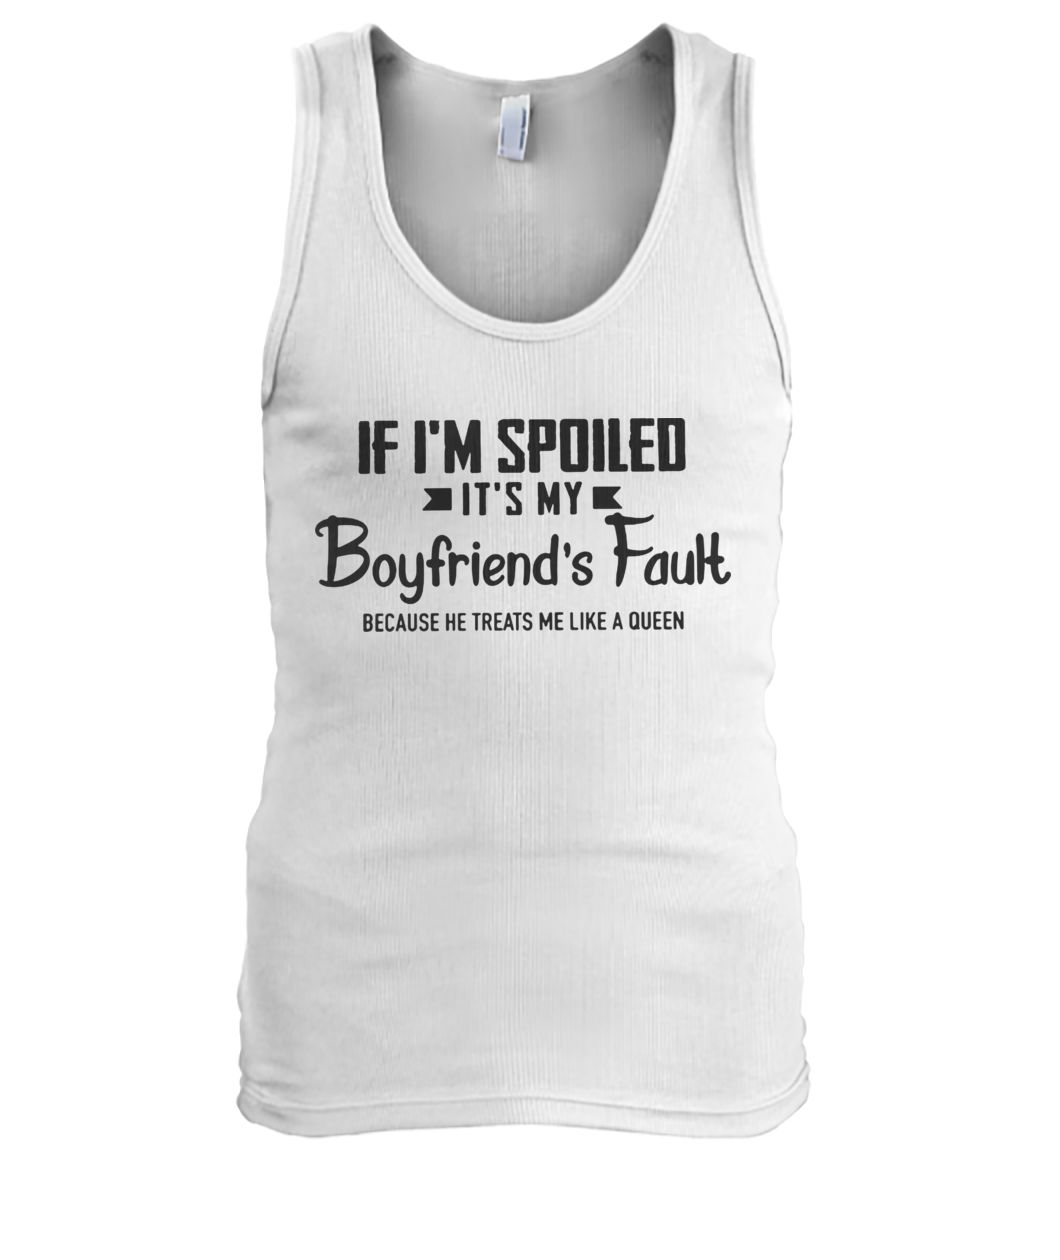 If I'm spoiled it's my boyfriend's fault because he treats me like a queen men's tank top